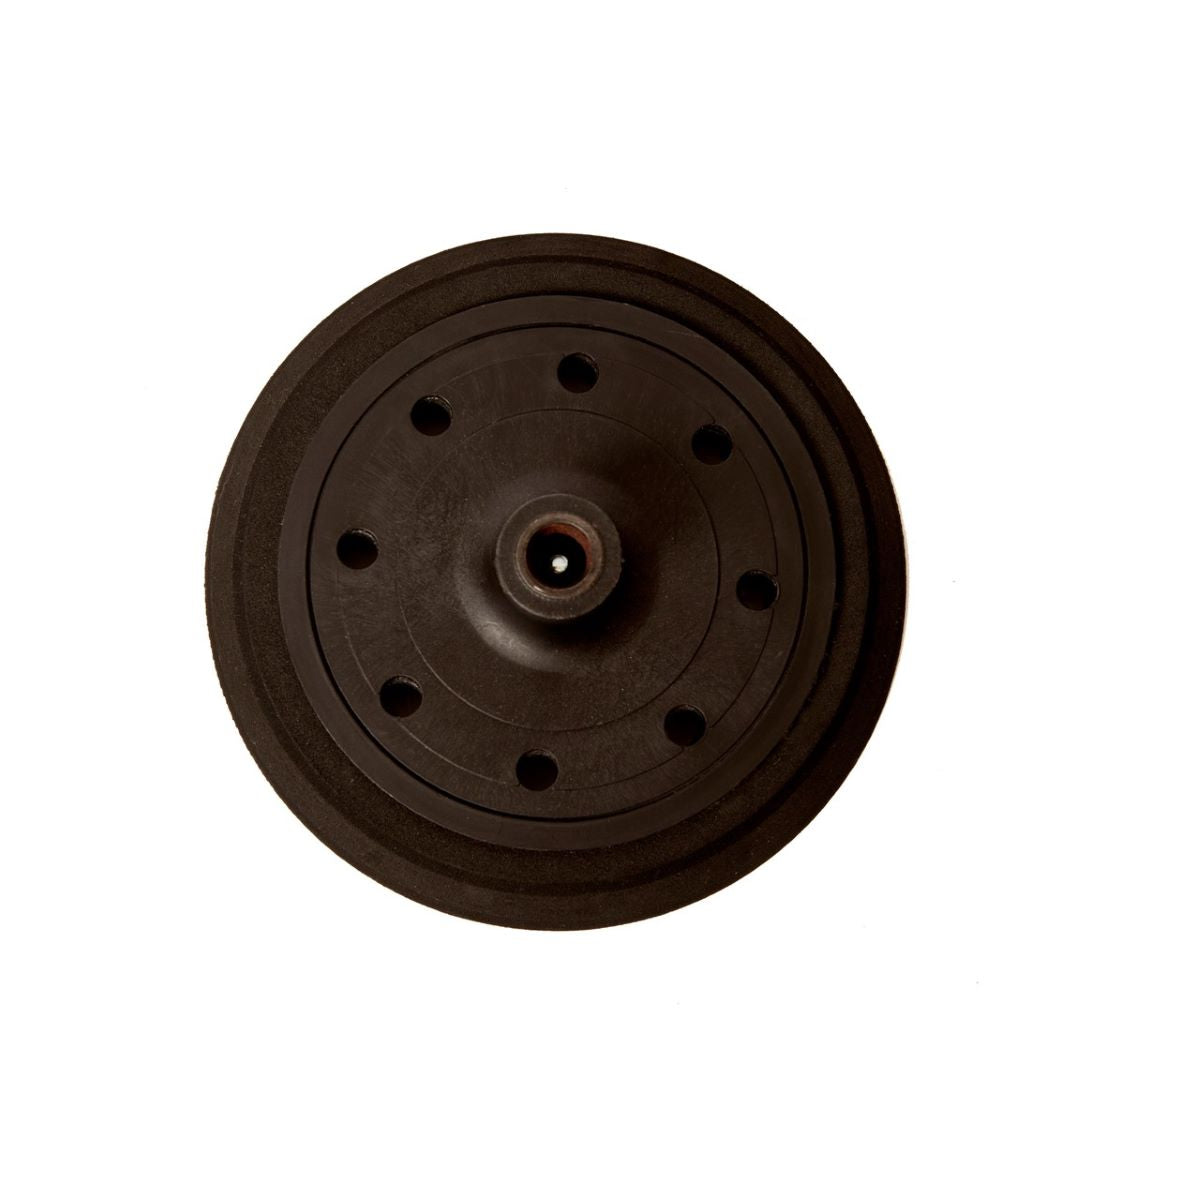 8" 16H (8 Inner & 8 Outer Holes) Black Hook Rotary Pad w/ Center Screw - For Rotary Sander Hook Discs